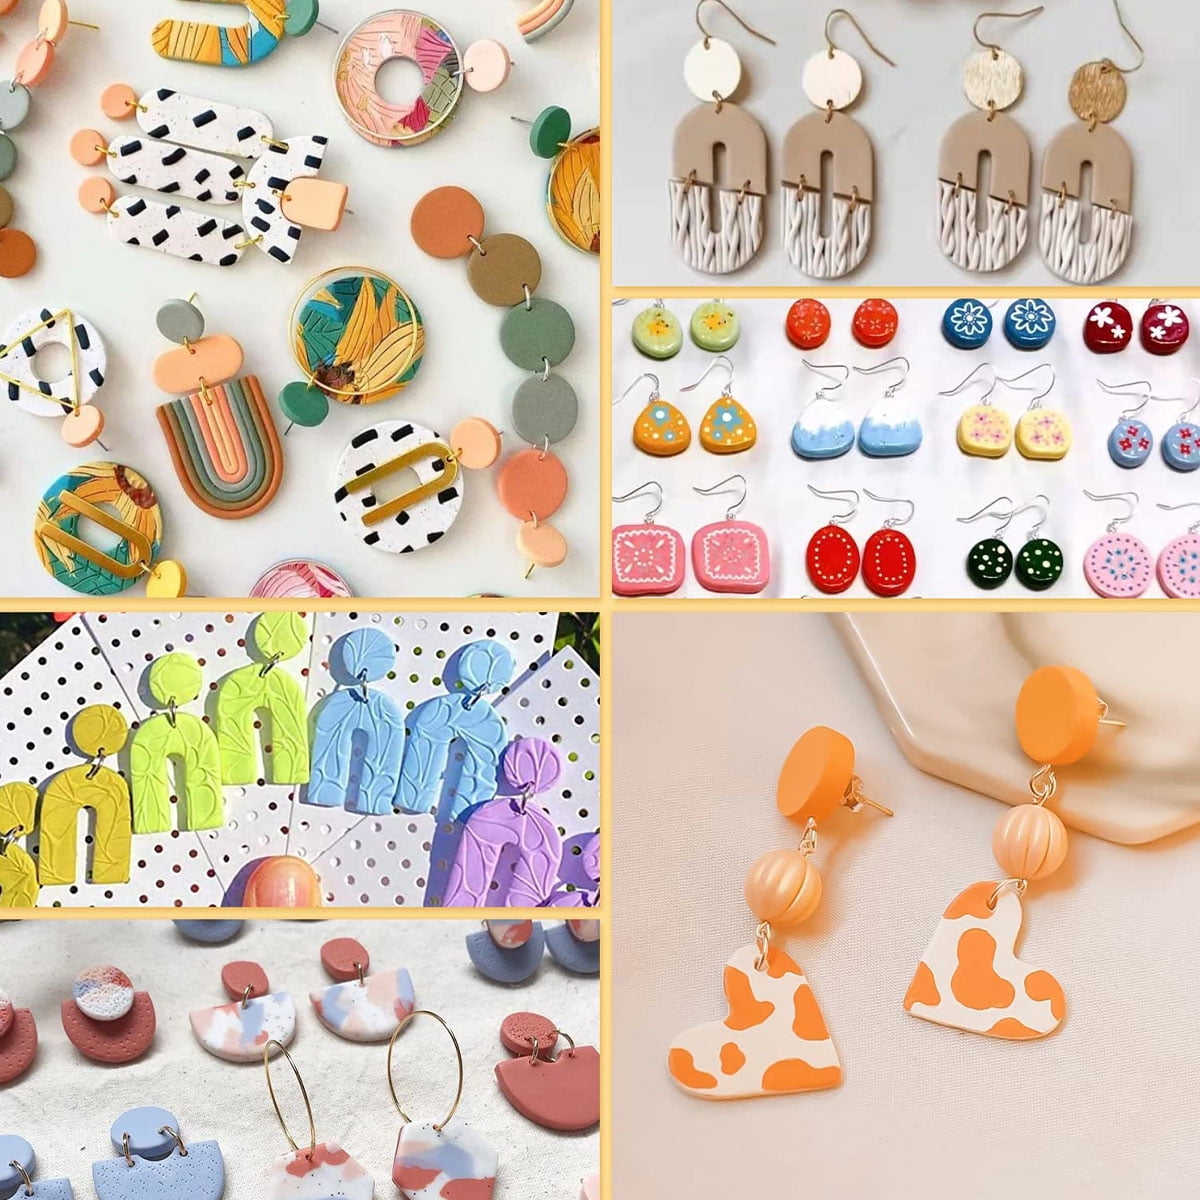 Keoker 123 PCS Clay Earring Making Kit, Polymer Clay Jewelry Making Kit for  Teens and Adults, Fashion Designer Kits for Girls, Polymer Clay Earrings